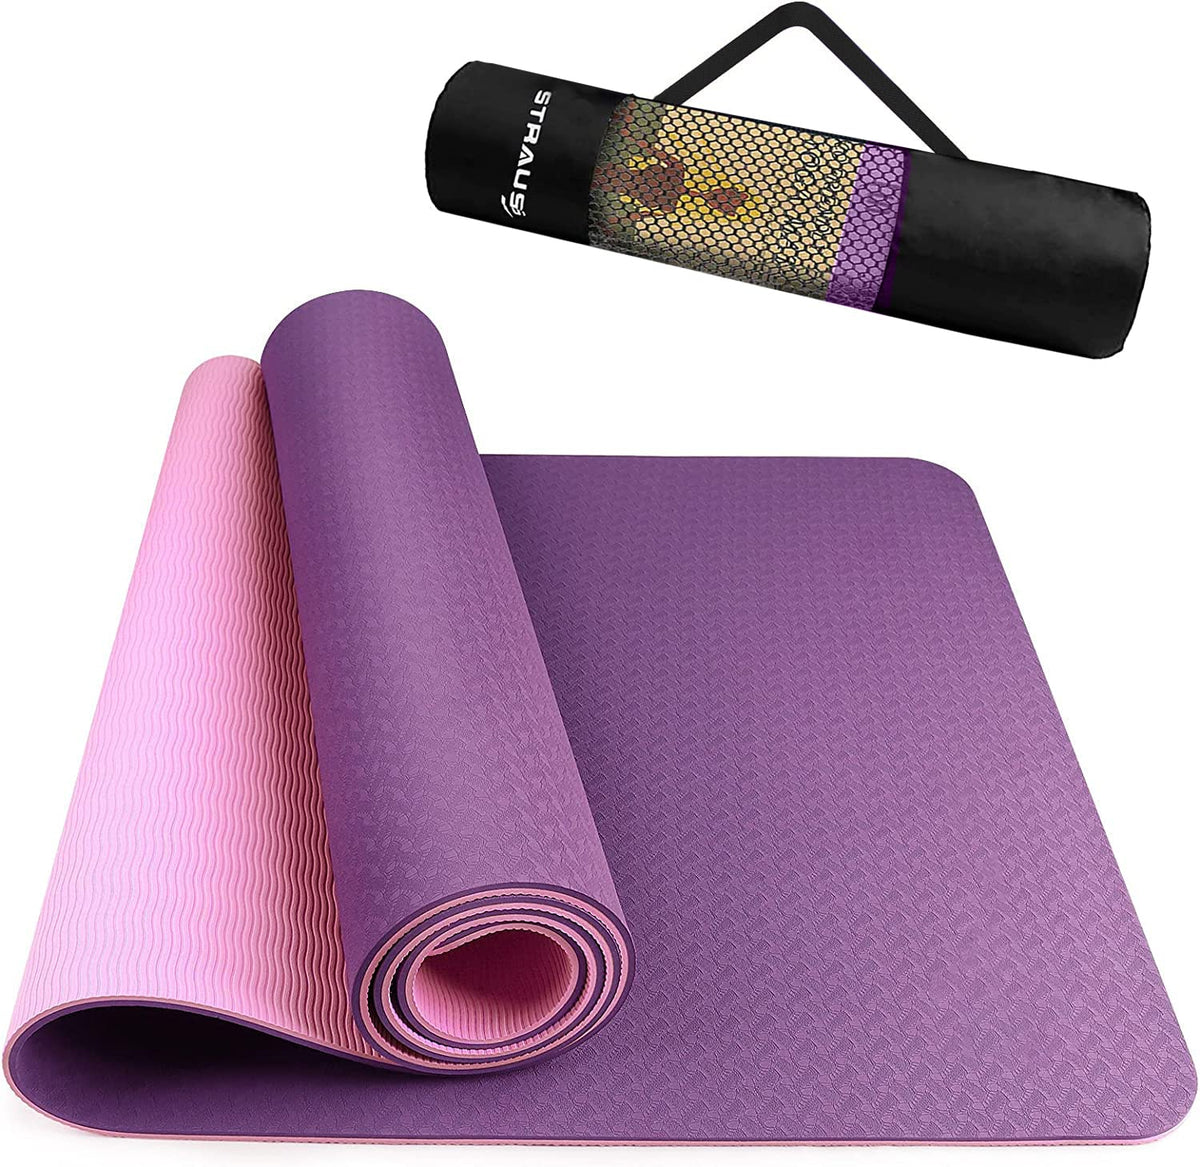 Strauss TPE Eco Friendly Dual Layer Yoga Mat, 6 mm (Pink)